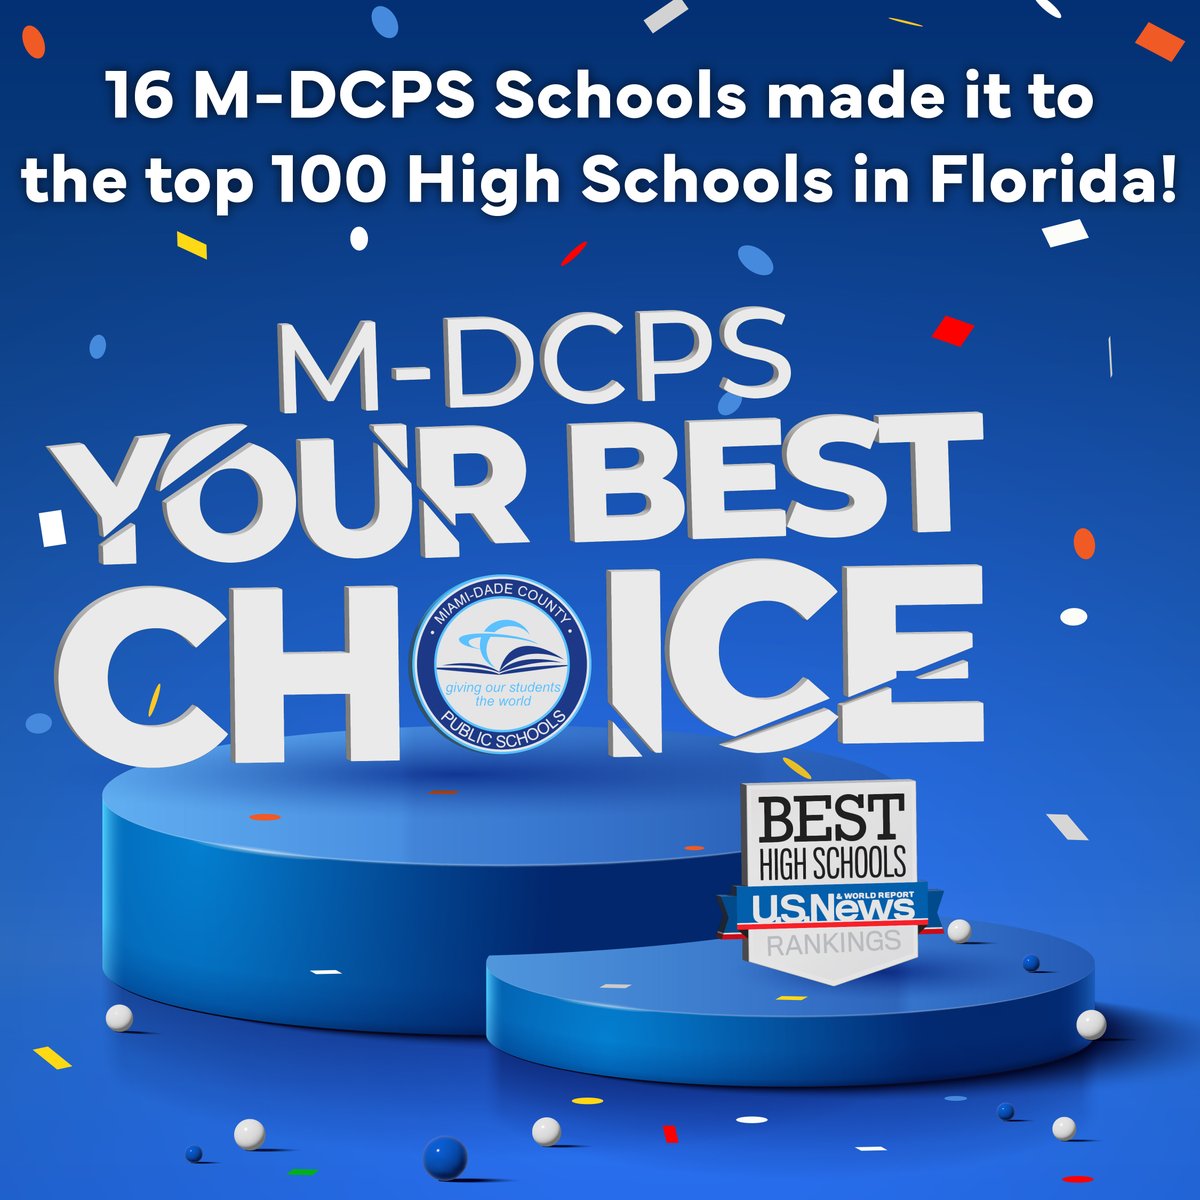 Exciting news! 16 @MDCPS schools have been named among the top 100 high schools in Florida by @usnews! This achievement showcases the excellence and dedication within our schools. Proud to be YOUR best choice for quality education. #YourBestChoiceMDCPS